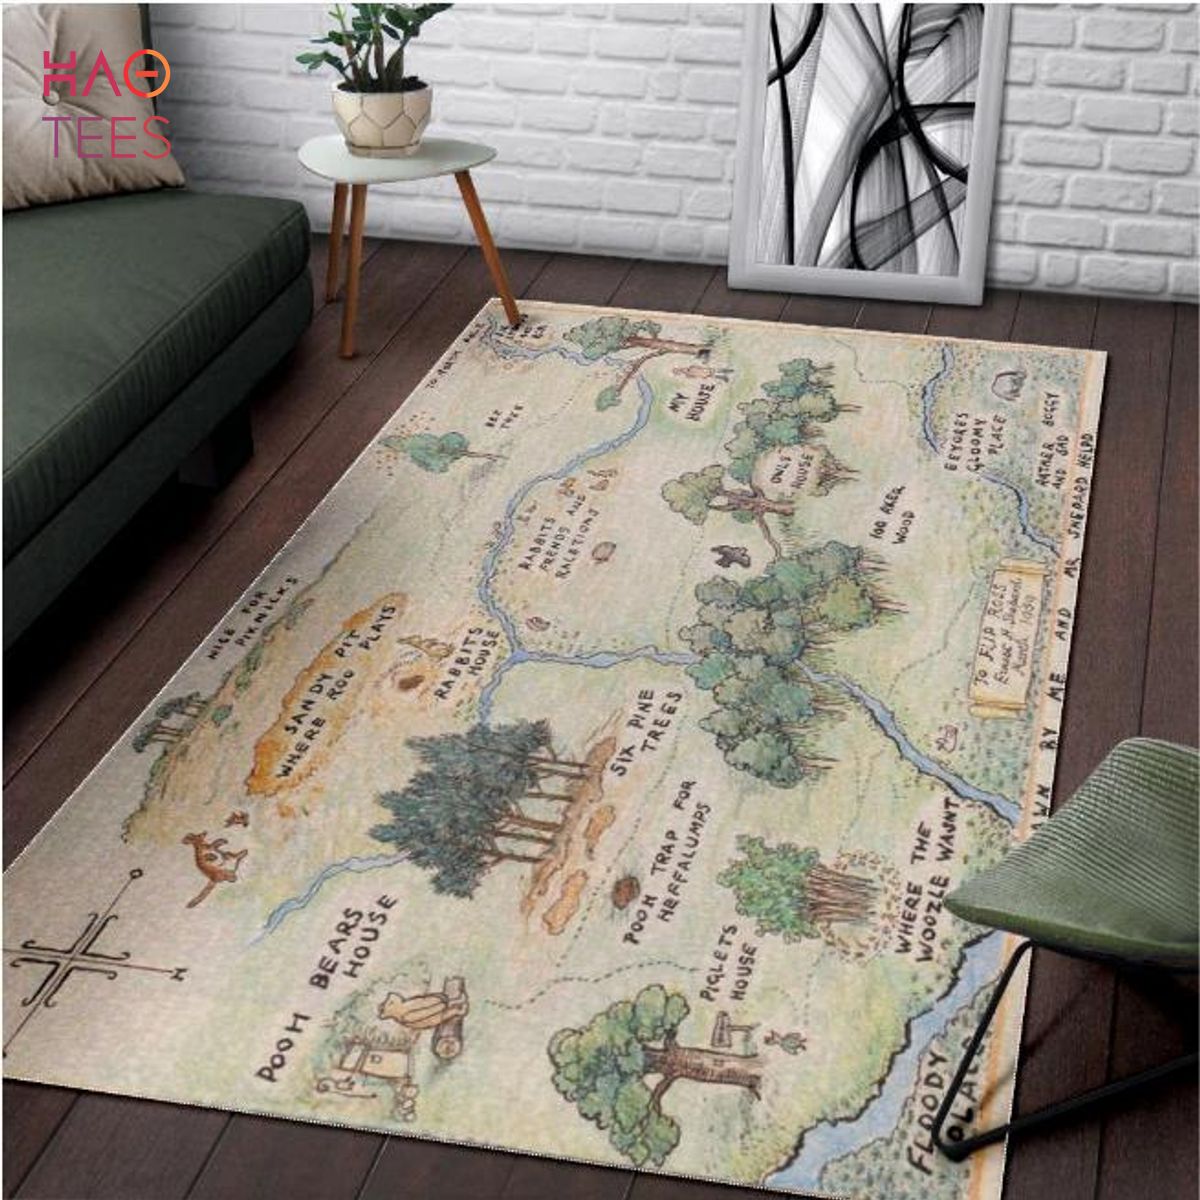 BEST 100 Acre Wood Map Winnie The Pooh Jungle Limited Edition Rug Carpet